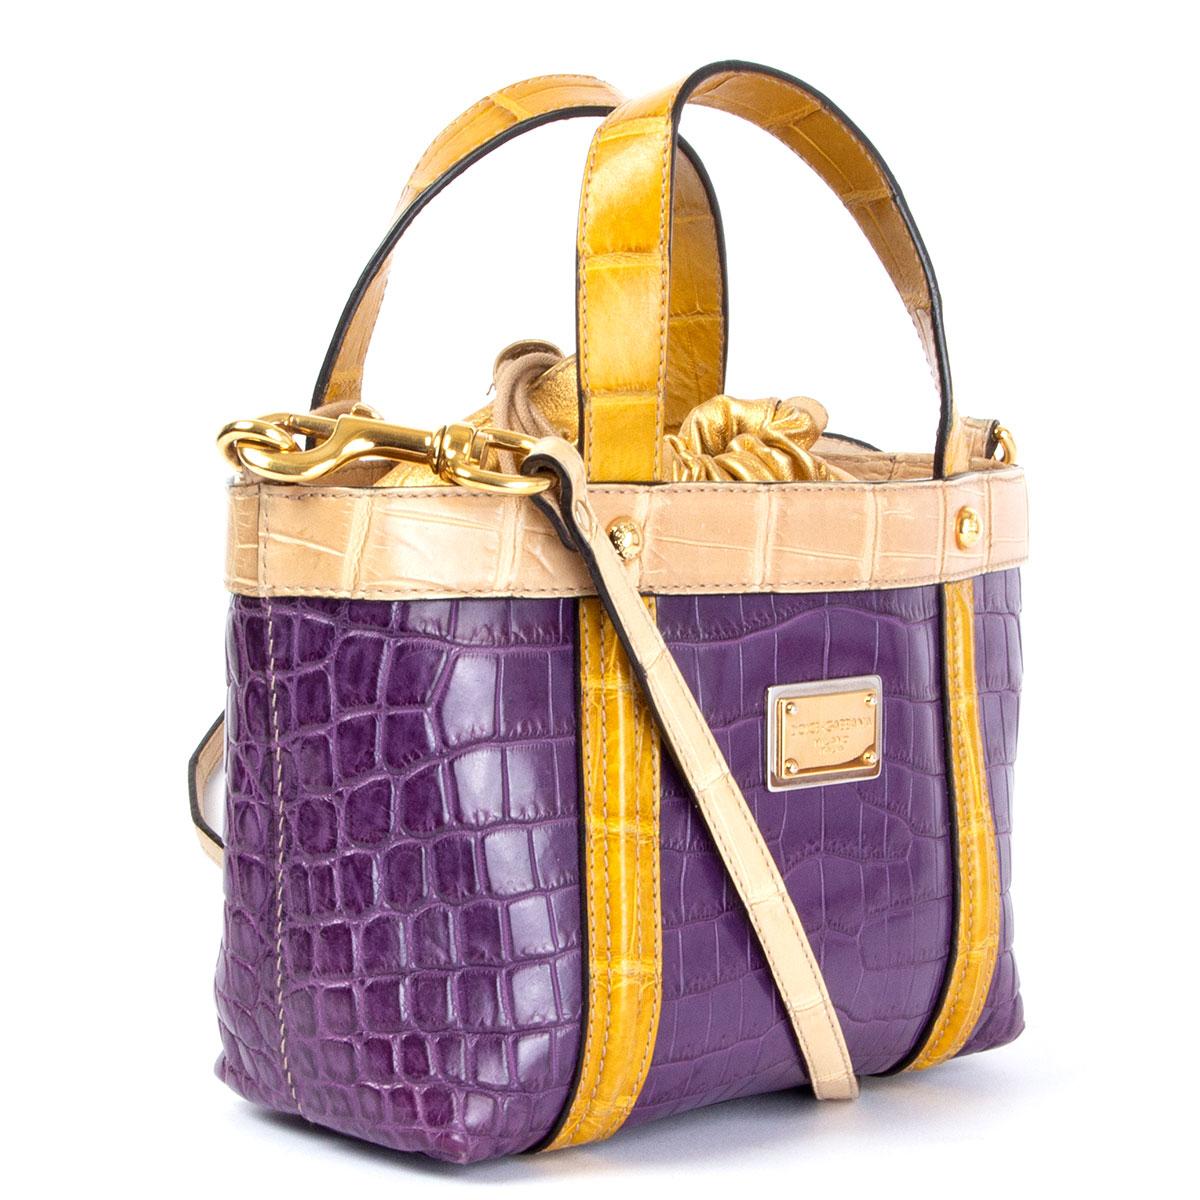 100% authentic Dolce & Gabbana Limited Edition bag in purple, beige and mustard embossed crocodile leather with golden metallic leather lining featuring drawstring closure. Has one zip pocket on the inside and a detachable shoulder strap. Has been